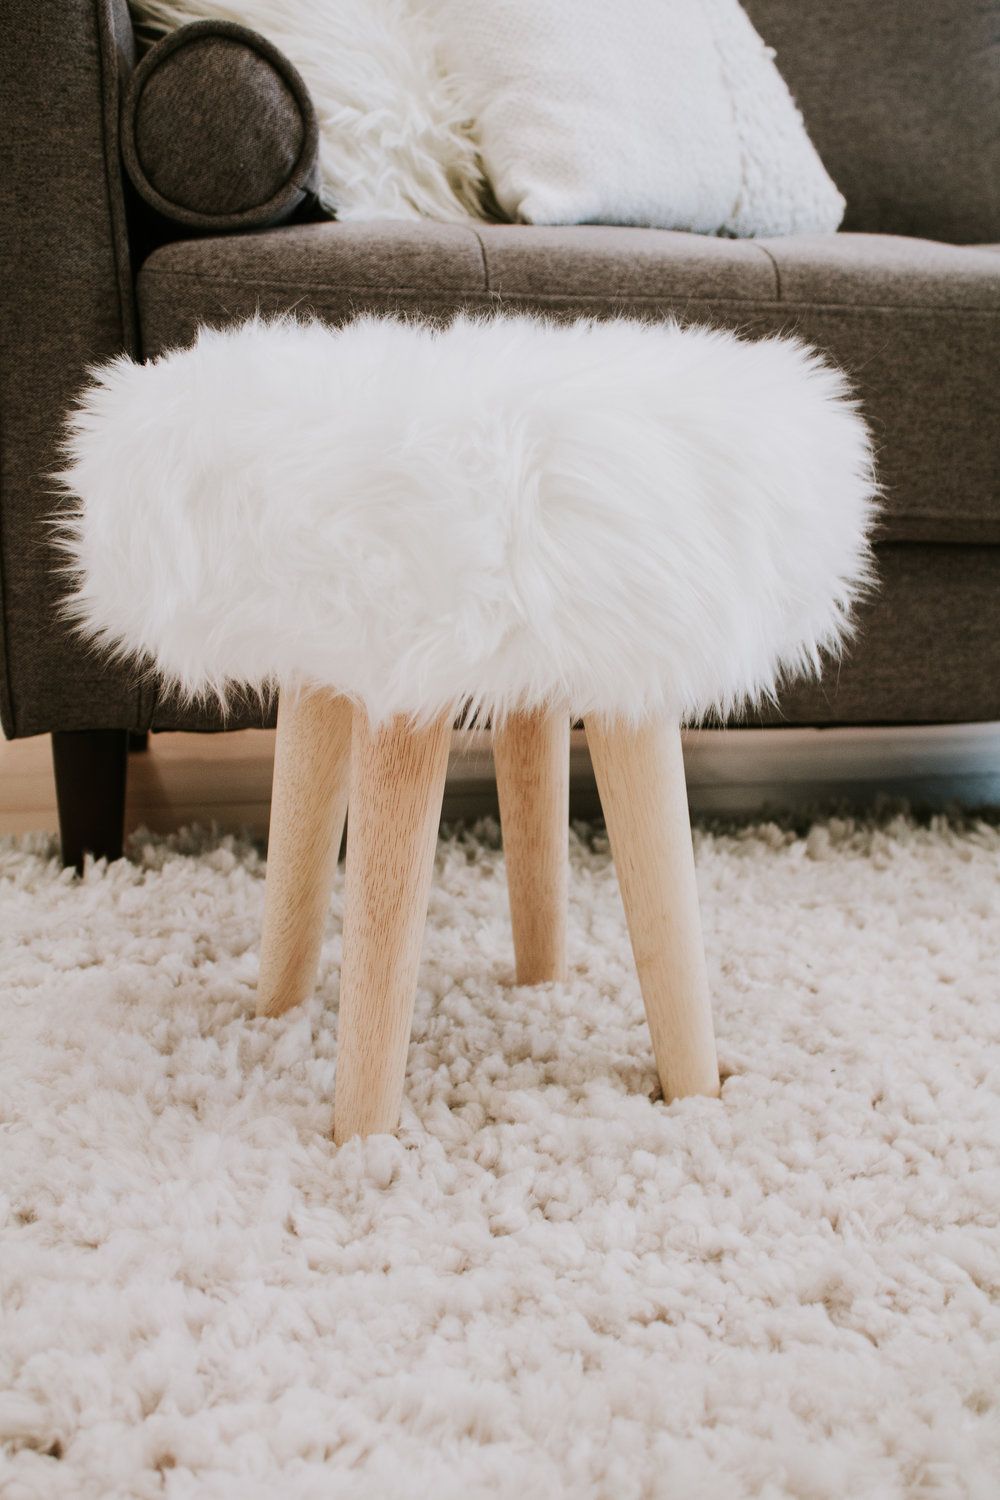 The foot stools, how useful they are